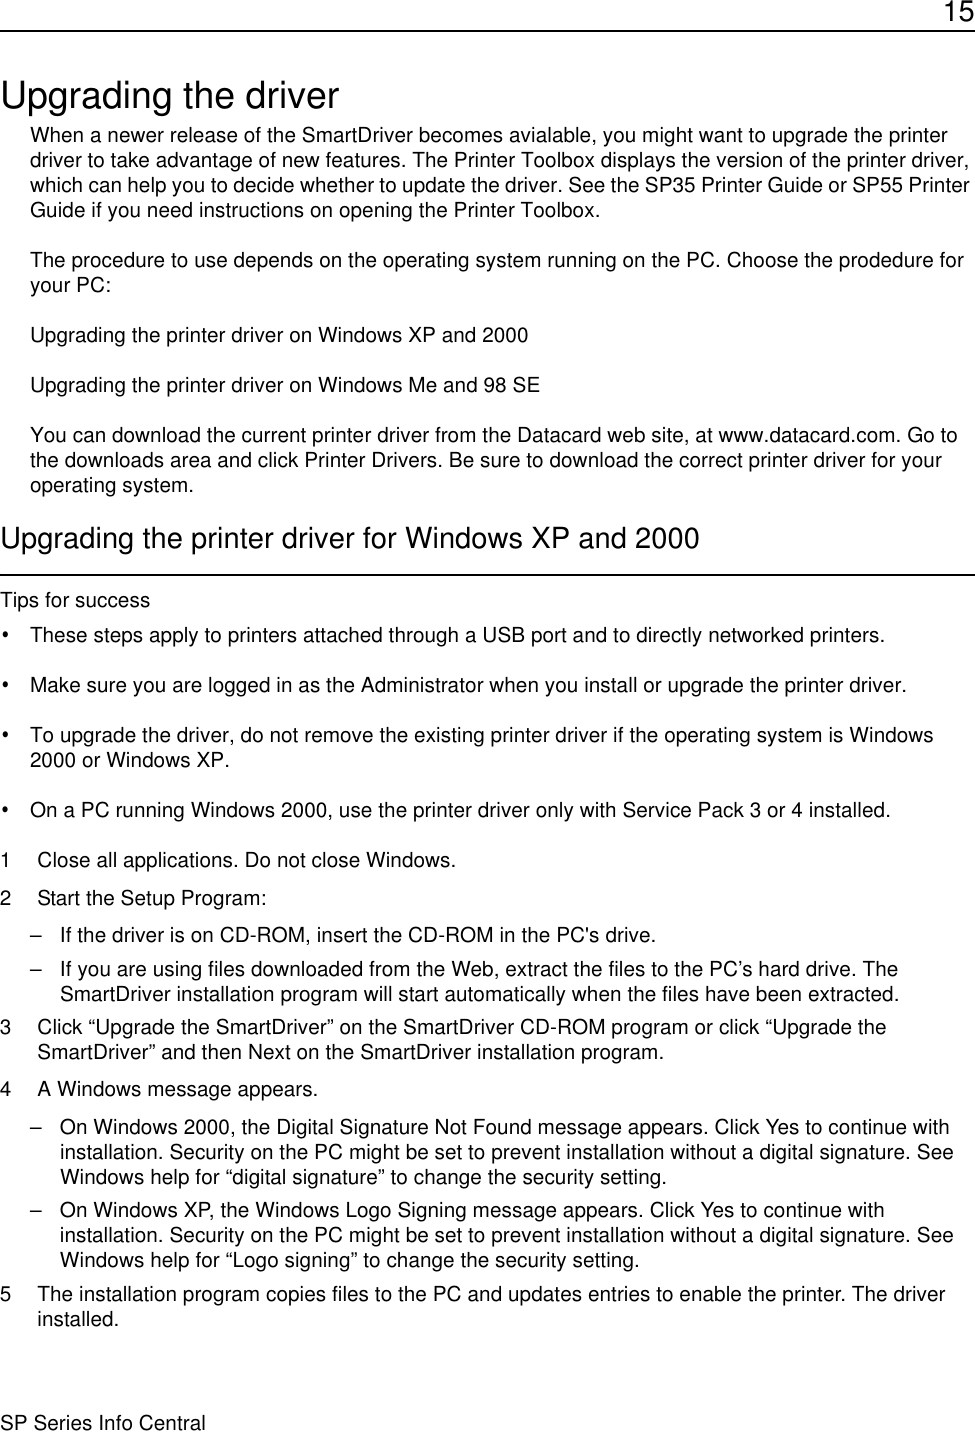 15SP Series Info CentralUpgrading the driverWhen a newer release of the SmartDriver becomes avialable, you might want to upgrade the printer driver to take advantage of new features. The Printer Toolbox displays the version of the printer driver, which can help you to decide whether to update the driver. See the SP35 Printer Guide or SP55 Printer Guide if you need instructions on opening the Printer Toolbox.The procedure to use depends on the operating system running on the PC. Choose the prodedure for your PC:Upgrading the printer driver on Windows XP and 2000Upgrading the printer driver on Windows Me and 98 SEYou can download the current printer driver from the Datacard web site, at www.datacard.com. Go to the downloads area and click Printer Drivers. Be sure to download the correct printer driver for your operating system. Upgrading the printer driver for Windows XP and 2000Tips for success•These steps apply to printers attached through a USB port and to directly networked printers.•Make sure you are logged in as the Administrator when you install or upgrade the printer driver. •To upgrade the driver, do not remove the existing printer driver if the operating system is Windows 2000 or Windows XP.•On a PC running Windows 2000, use the printer driver only with Service Pack 3 or 4 installed.1 Close all applications. Do not close Windows.2 Start the Setup Program:– If the driver is on CD-ROM, insert the CD-ROM in the PC&apos;s drive.– If you are using files downloaded from the Web, extract the files to the PC’s hard drive. The SmartDriver installation program will start automatically when the files have been extracted.3 Click “Upgrade the SmartDriver” on the SmartDriver CD-ROM program or click “Upgrade the SmartDriver” and then Next on the SmartDriver installation program. 4 A Windows message appears.– On Windows 2000, the Digital Signature Not Found message appears. Click Yes to continue with installation. Security on the PC might be set to prevent installation without a digital signature. See Windows help for “digital signature” to change the security setting.– On Windows XP, the Windows Logo Signing message appears. Click Yes to continue with installation. Security on the PC might be set to prevent installation without a digital signature. See Windows help for “Logo signing” to change the security setting.5 The installation program copies files to the PC and updates entries to enable the printer. The driver  installed.